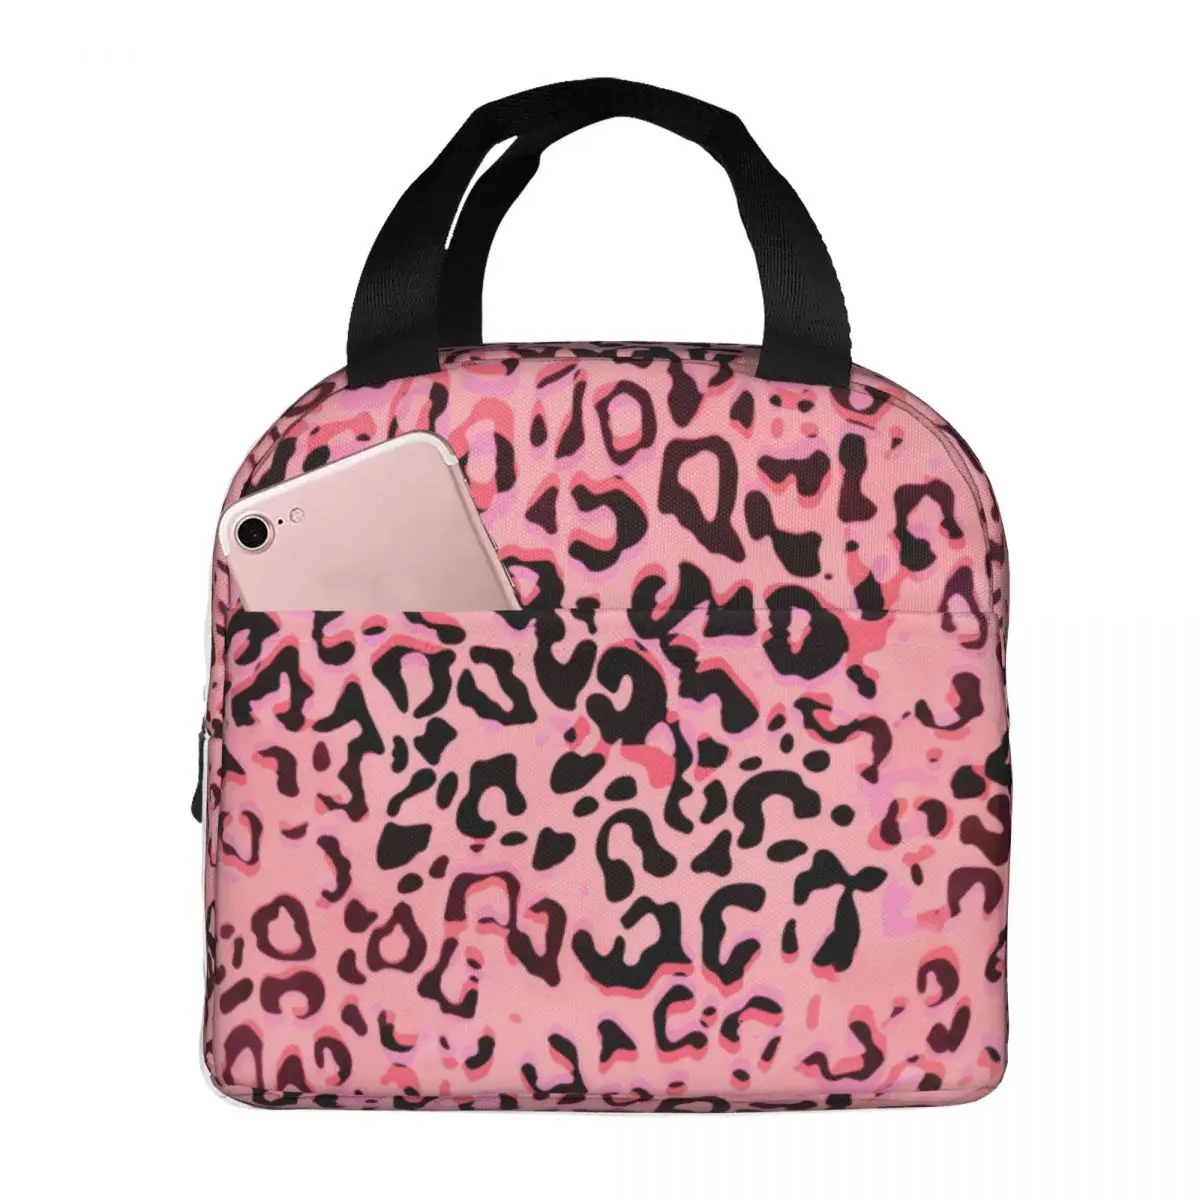 Leopard Print Lunch Bag Waterproof Insulated Canvas Cooler Bag Thermal Food Picnic Travel Lunch Box for Women Kids